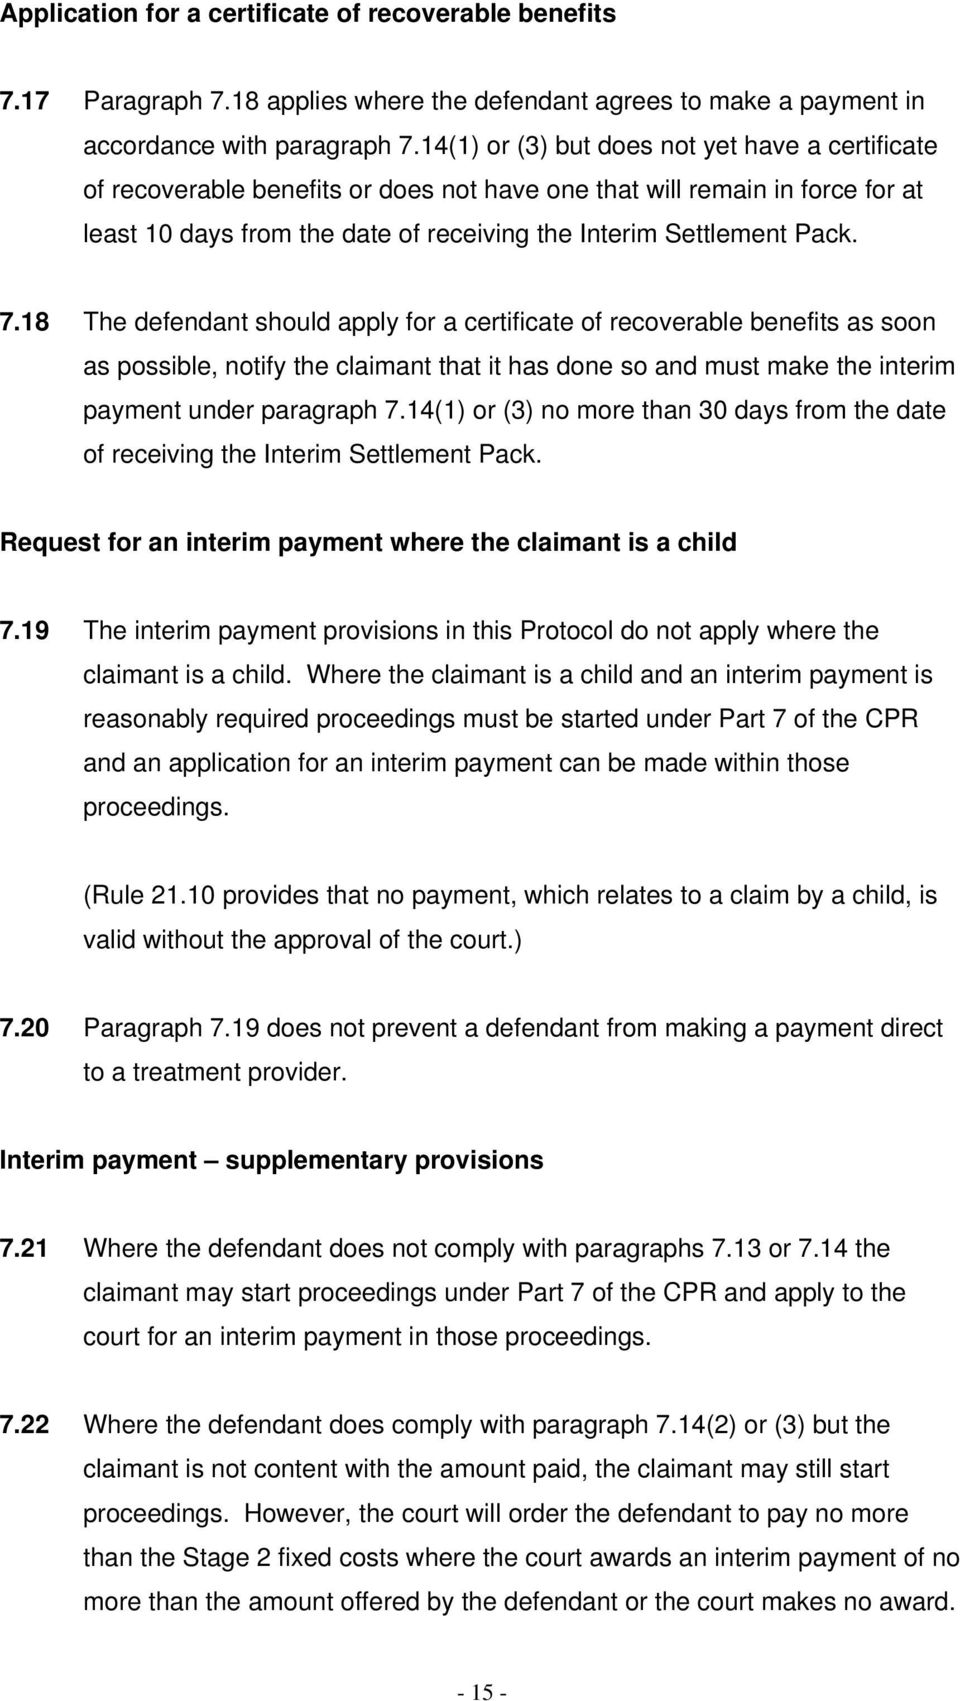 18 The defendant should apply for a certificate of recoverable benefits as soon as possible, notify the claimant that it has done so and must make the interim payment under paragraph 7.